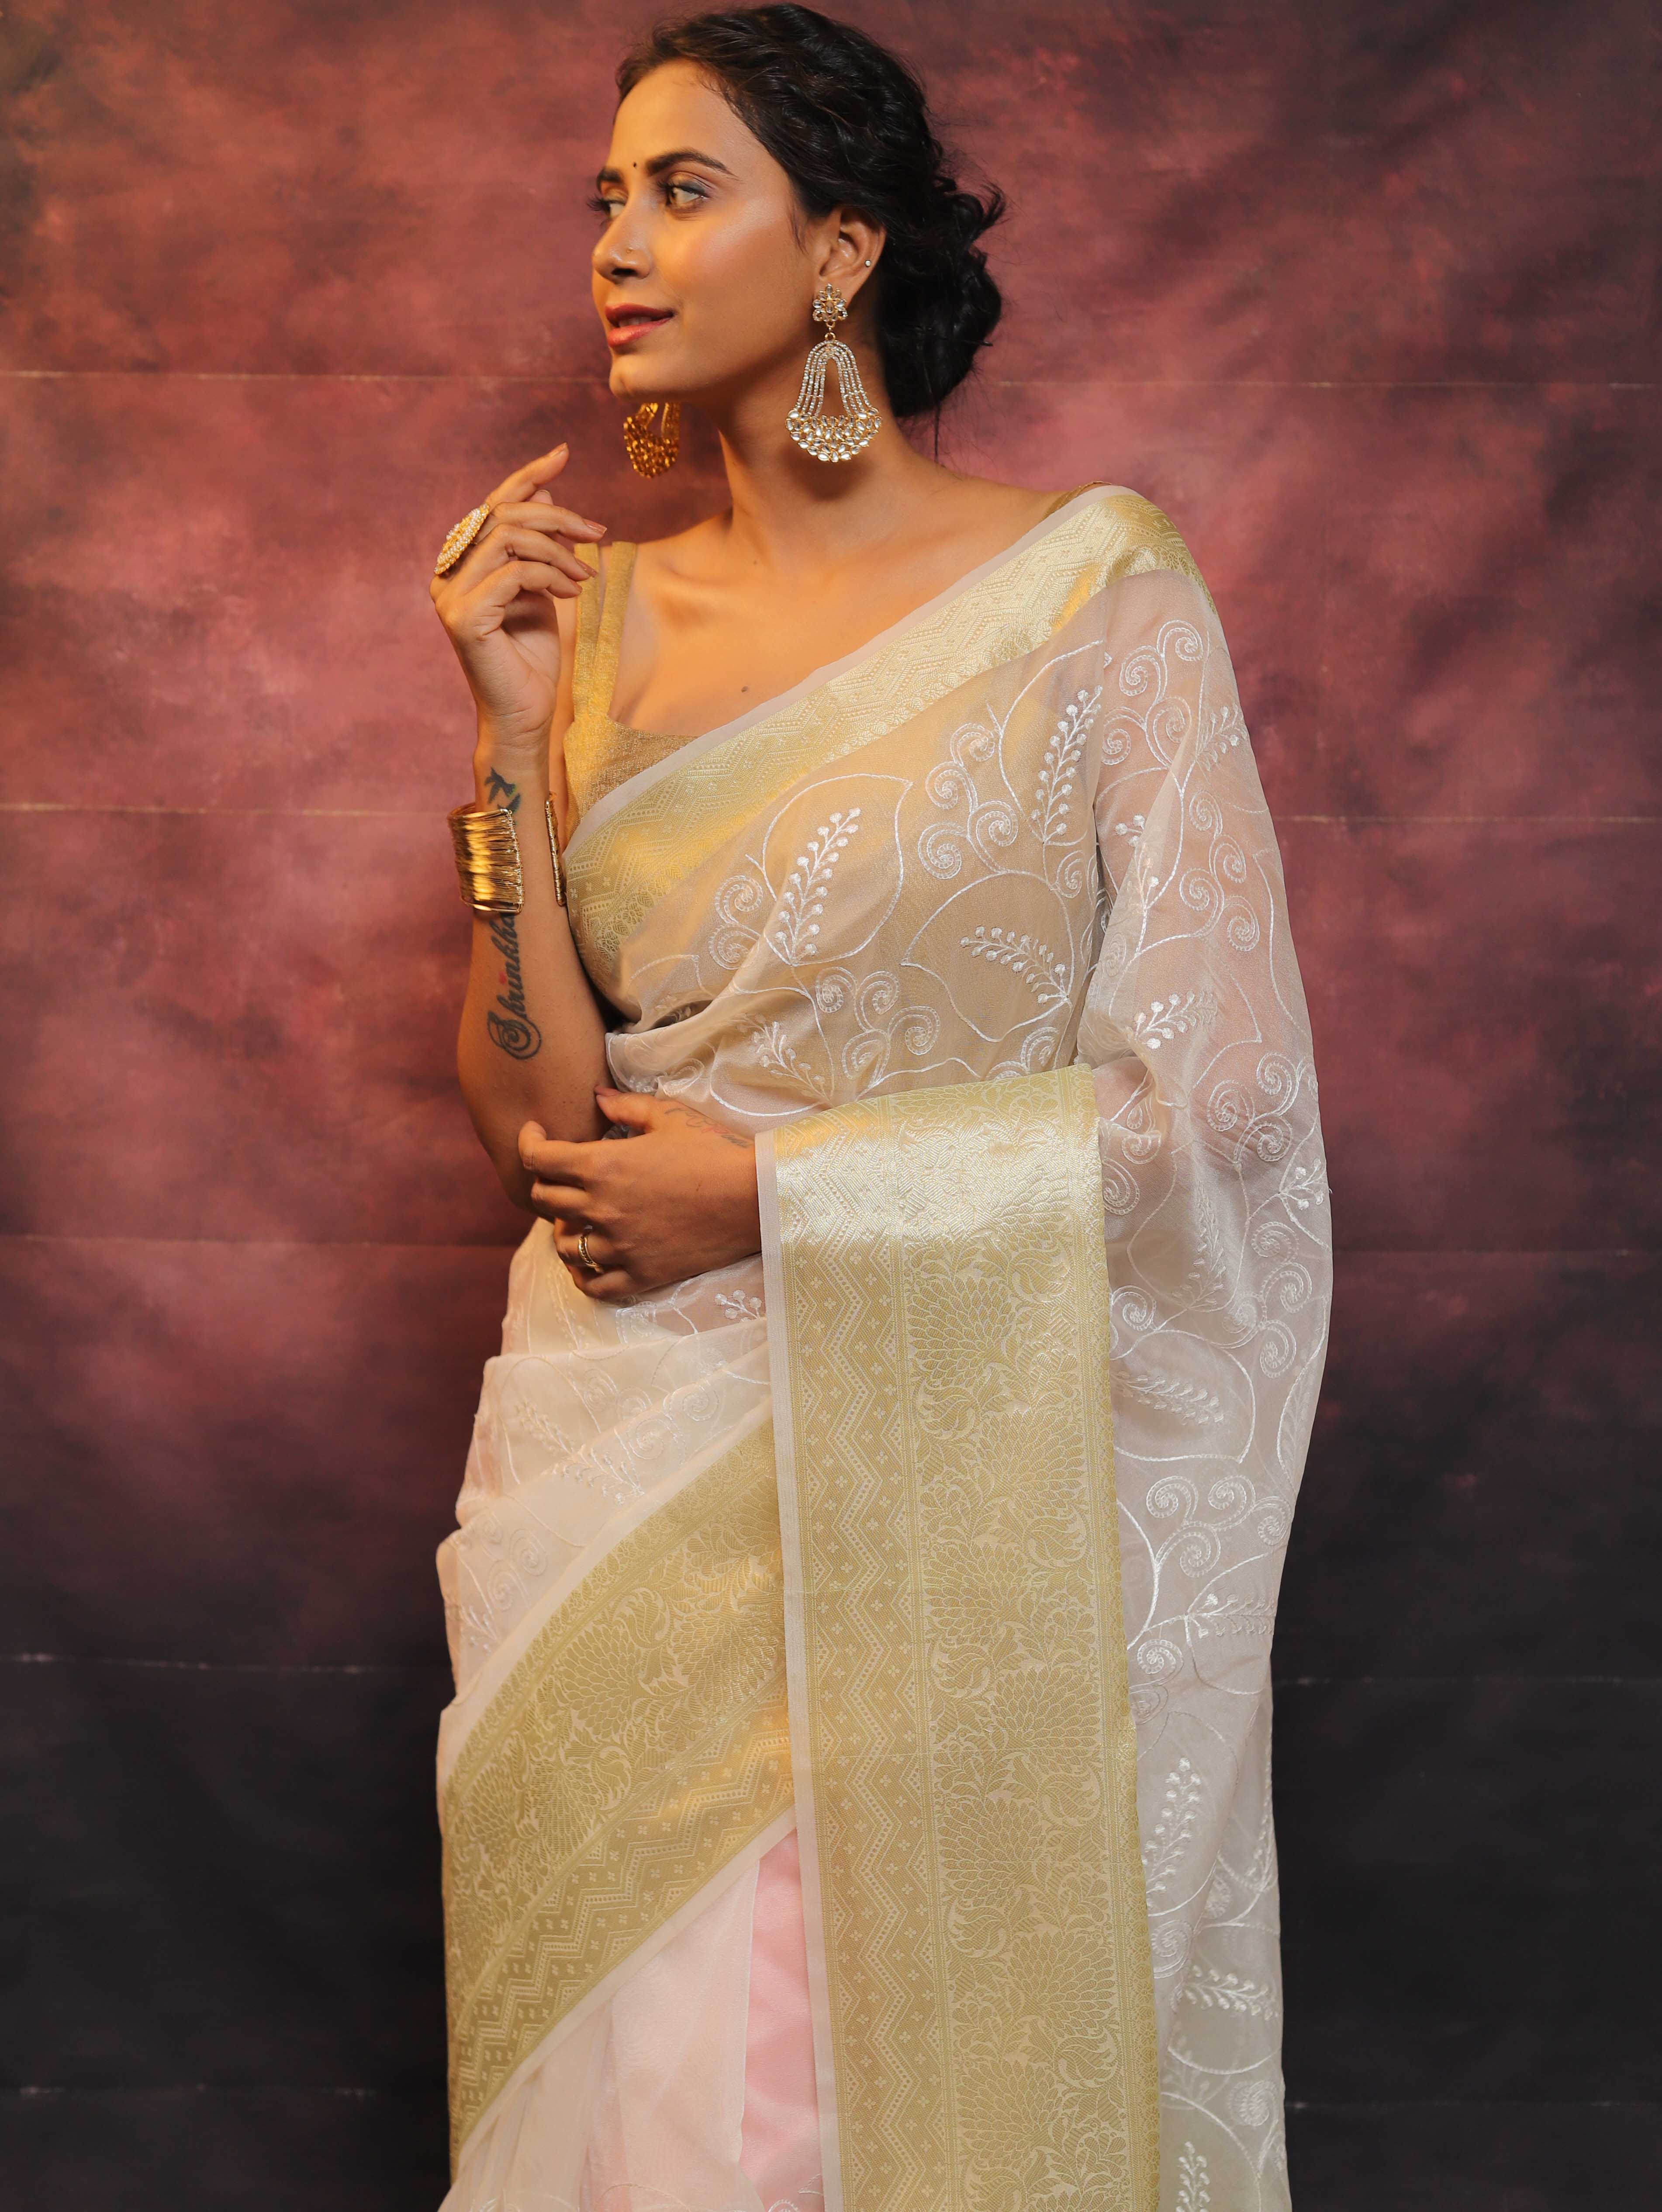 Banarasee Handwoven Broad Border Organza Saree With Embroidered Floral Design-White